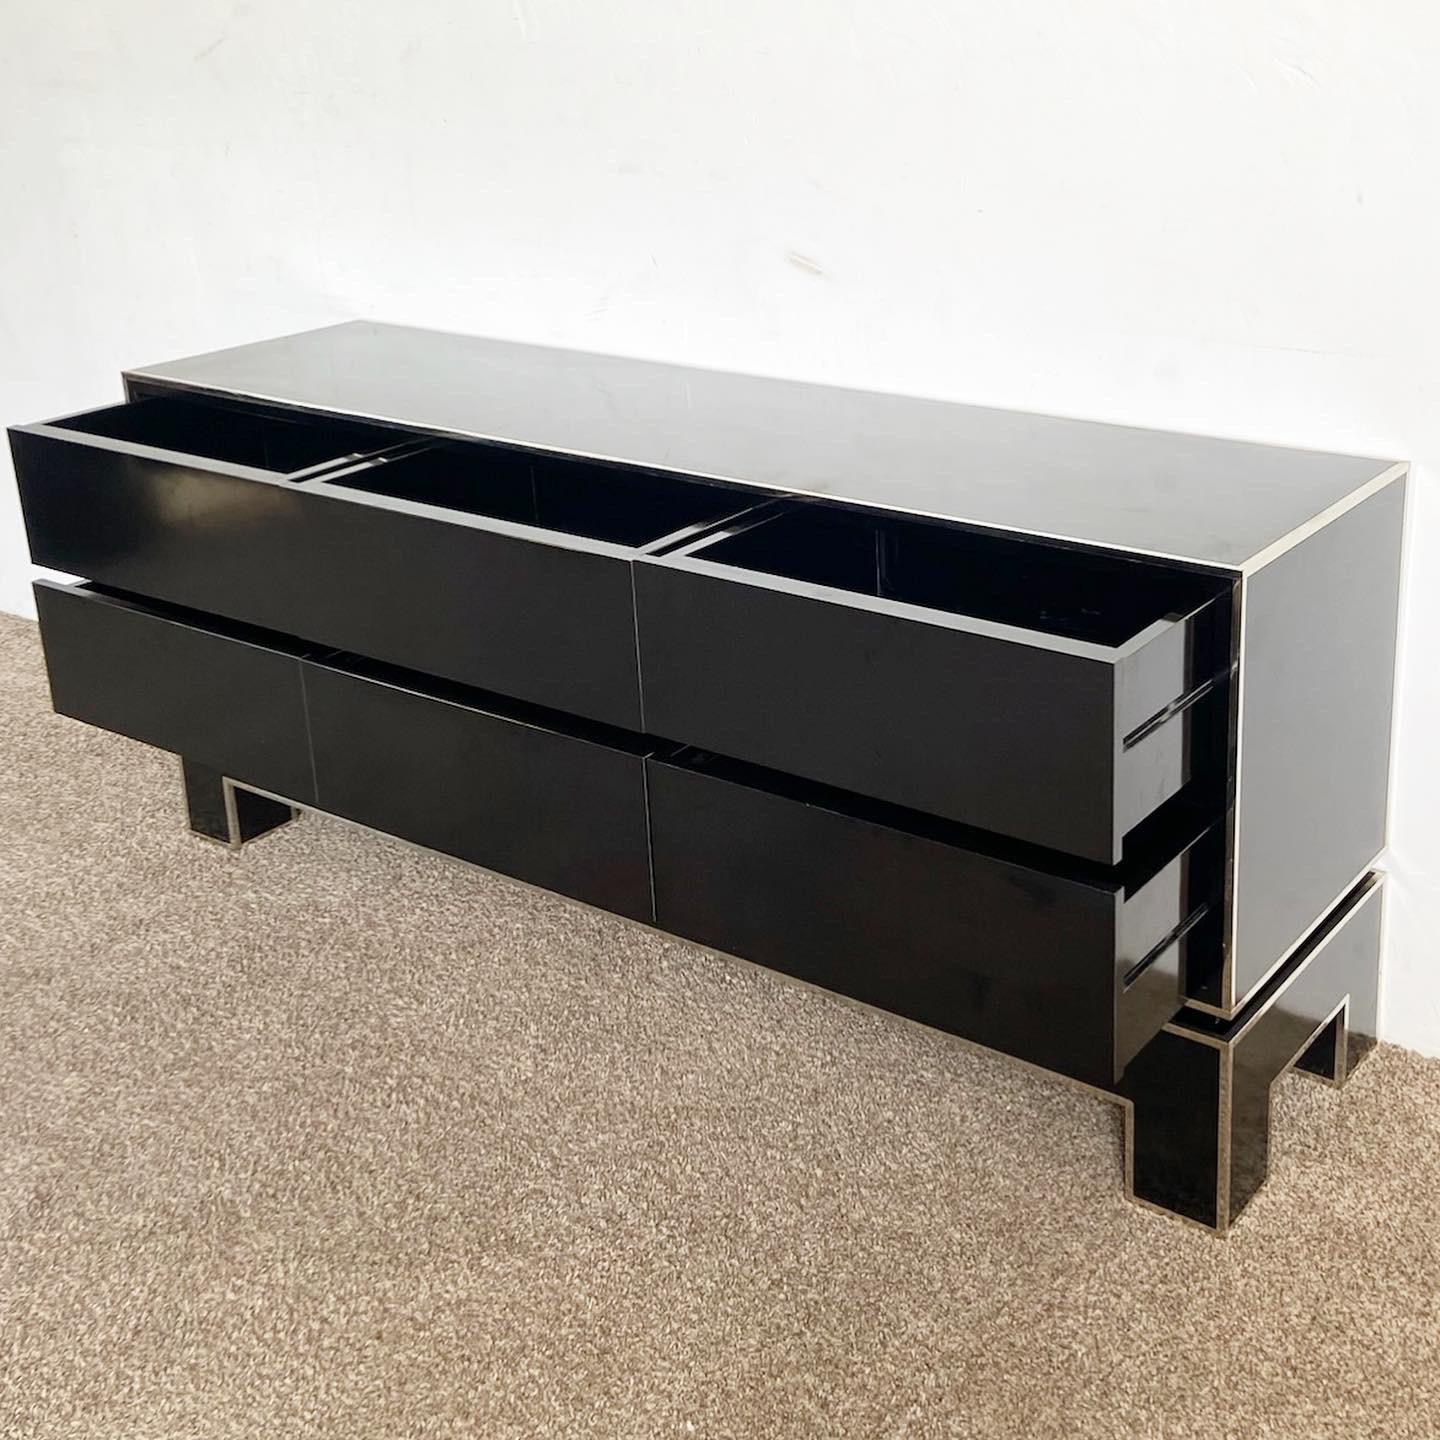 Late 20th Century Black and Gold Dresser by Alain Delon for Maison Jansen For Sale